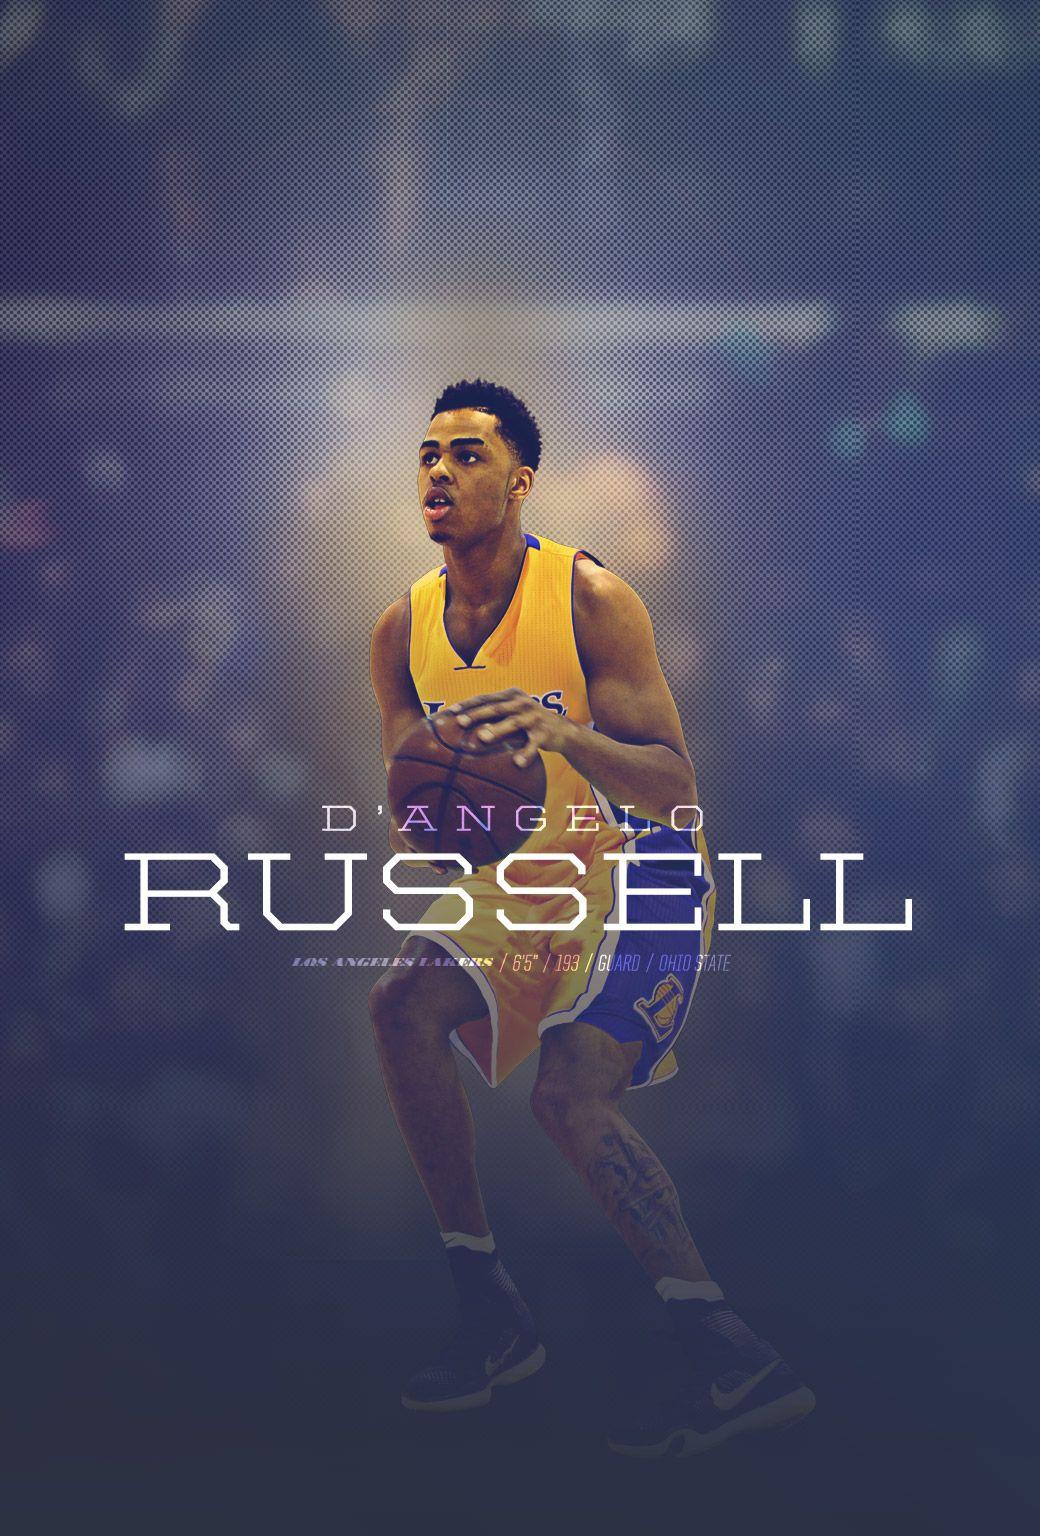 D'Angelo Russell // Ice in my veins DF . 20/03/2019  Nba wallpapers,  D'angelo russell wallpaper, Nba mvp